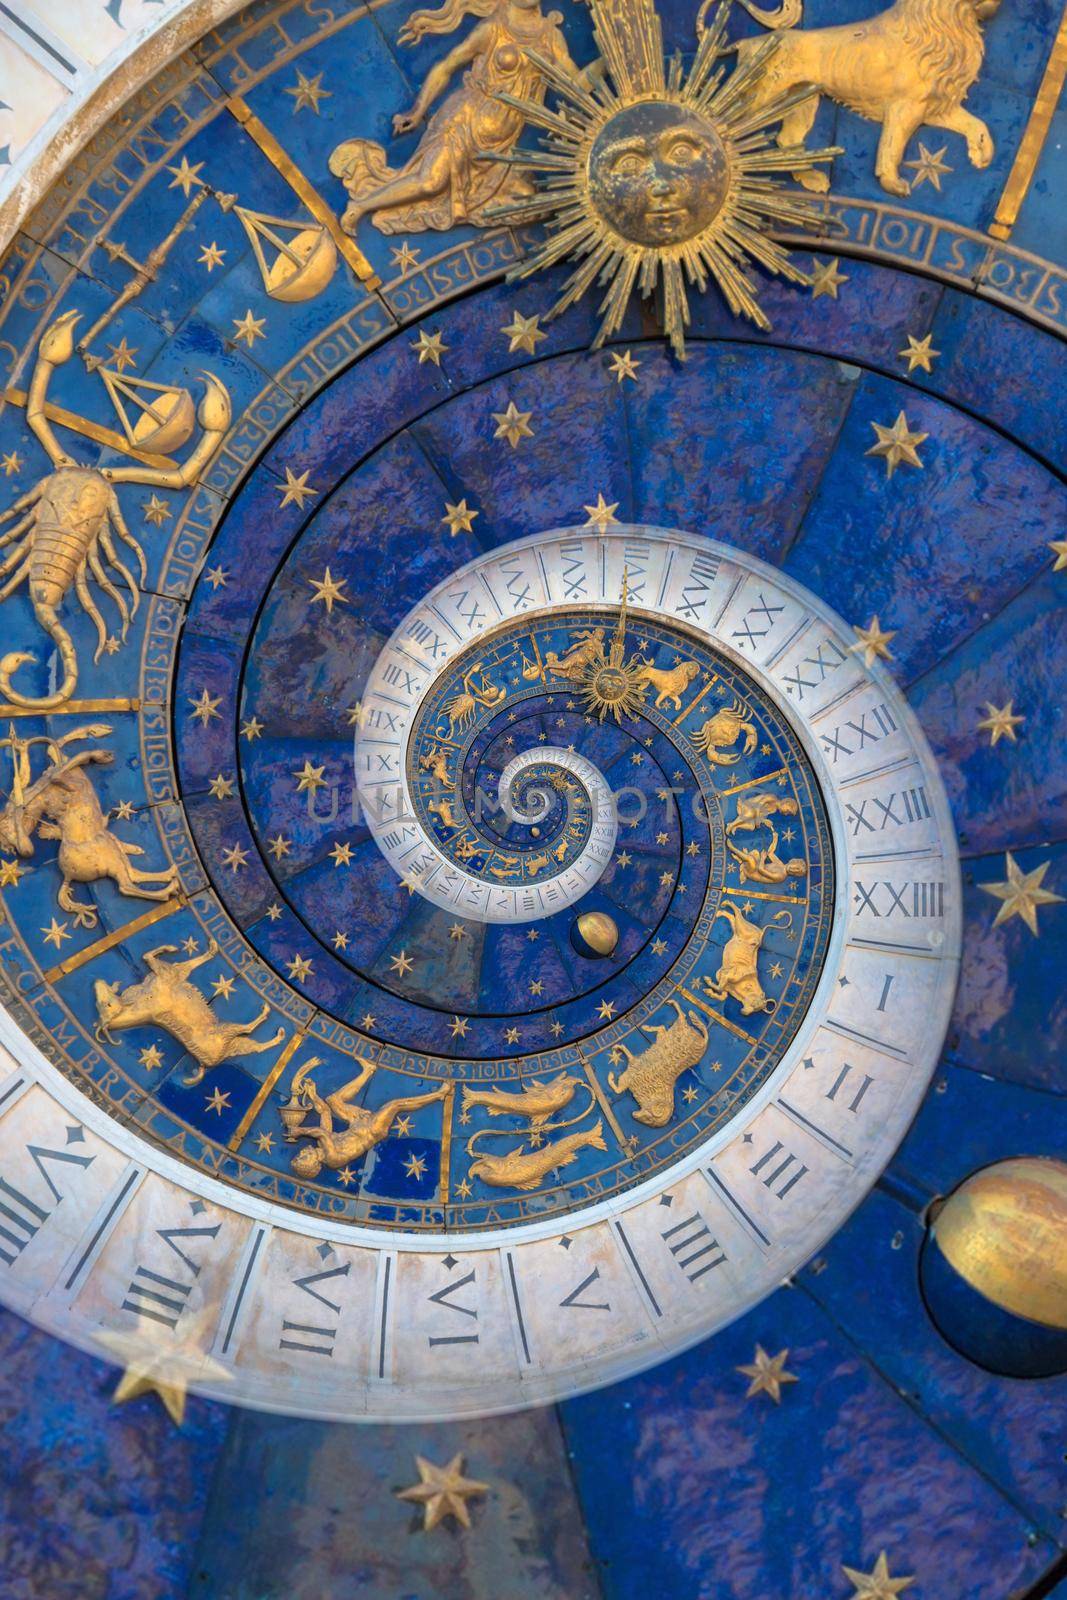 Zodiac Signs Horoscope background. Concept for fantasy and mystery - blue